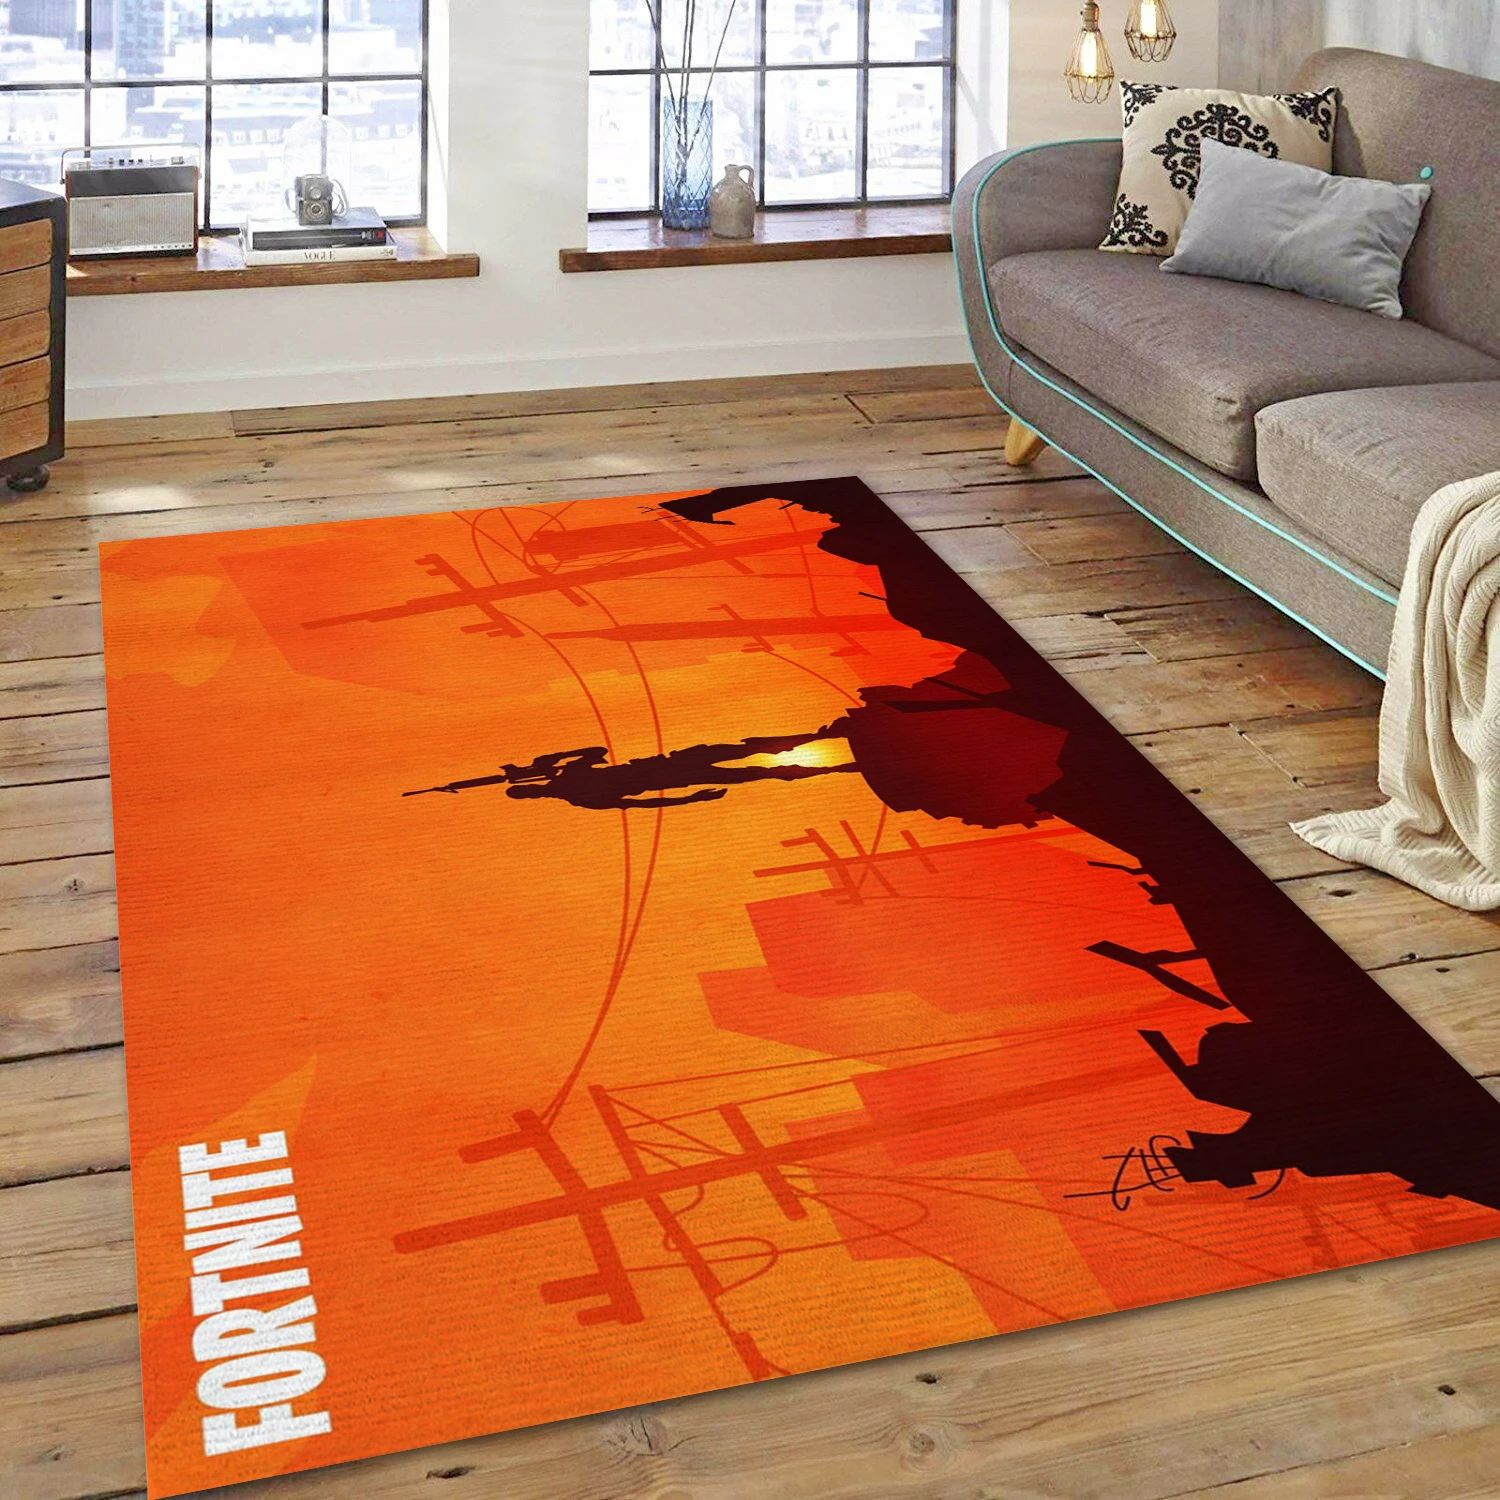 Fortnite Video Game Reangle Rug, Bedroom Rug - Christmas Gift Decor - Indoor Outdoor Rugs